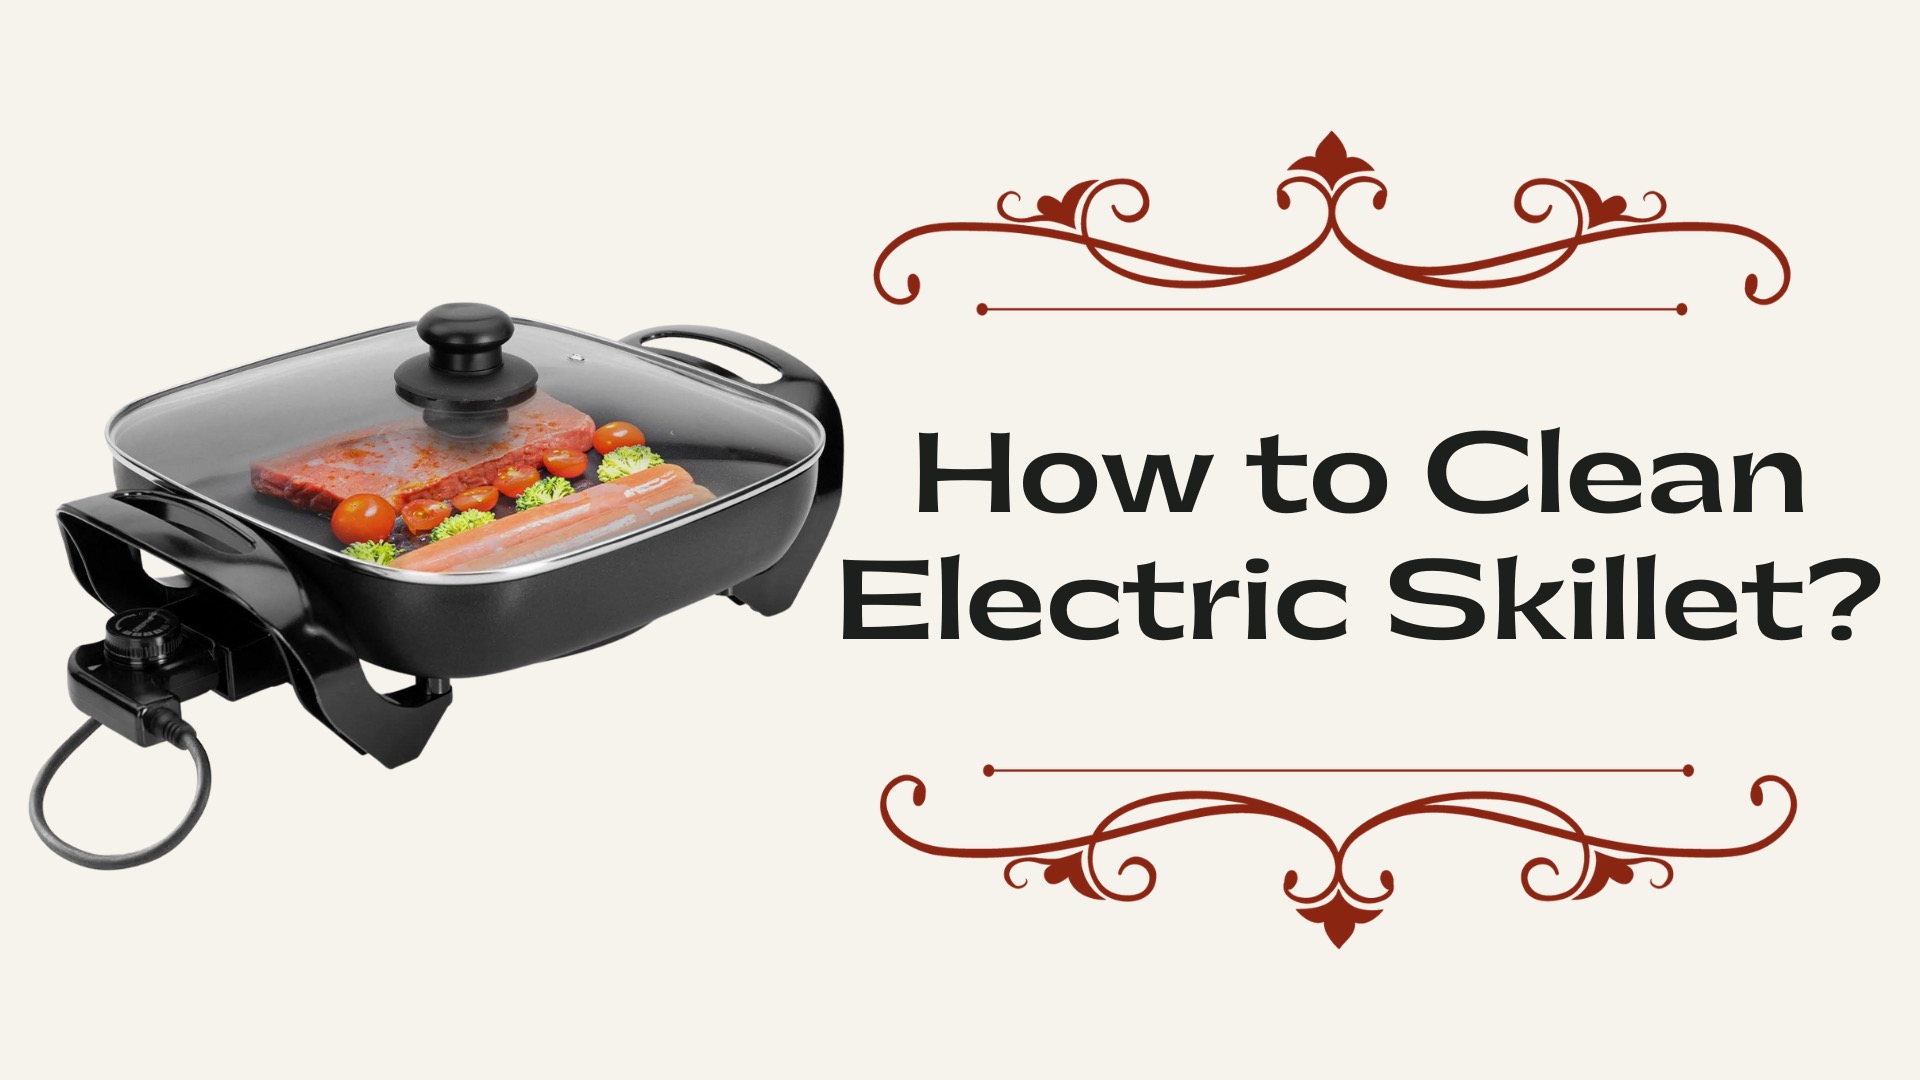 How to Clean Electric Skillet?